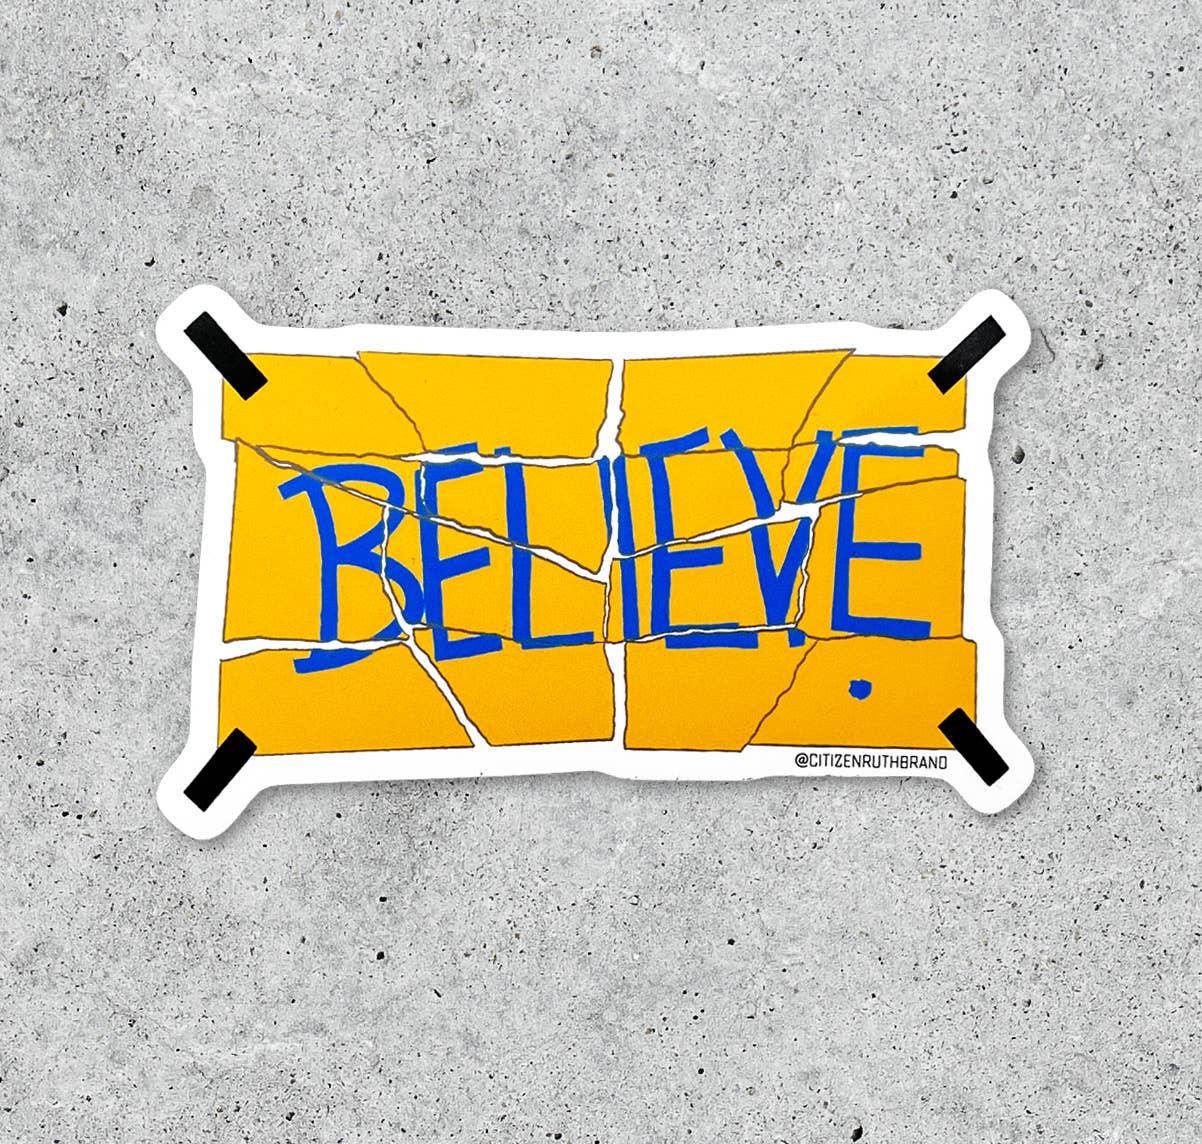 Citizen Ruth - Ted Lasso Torn Believe Sign Sticker